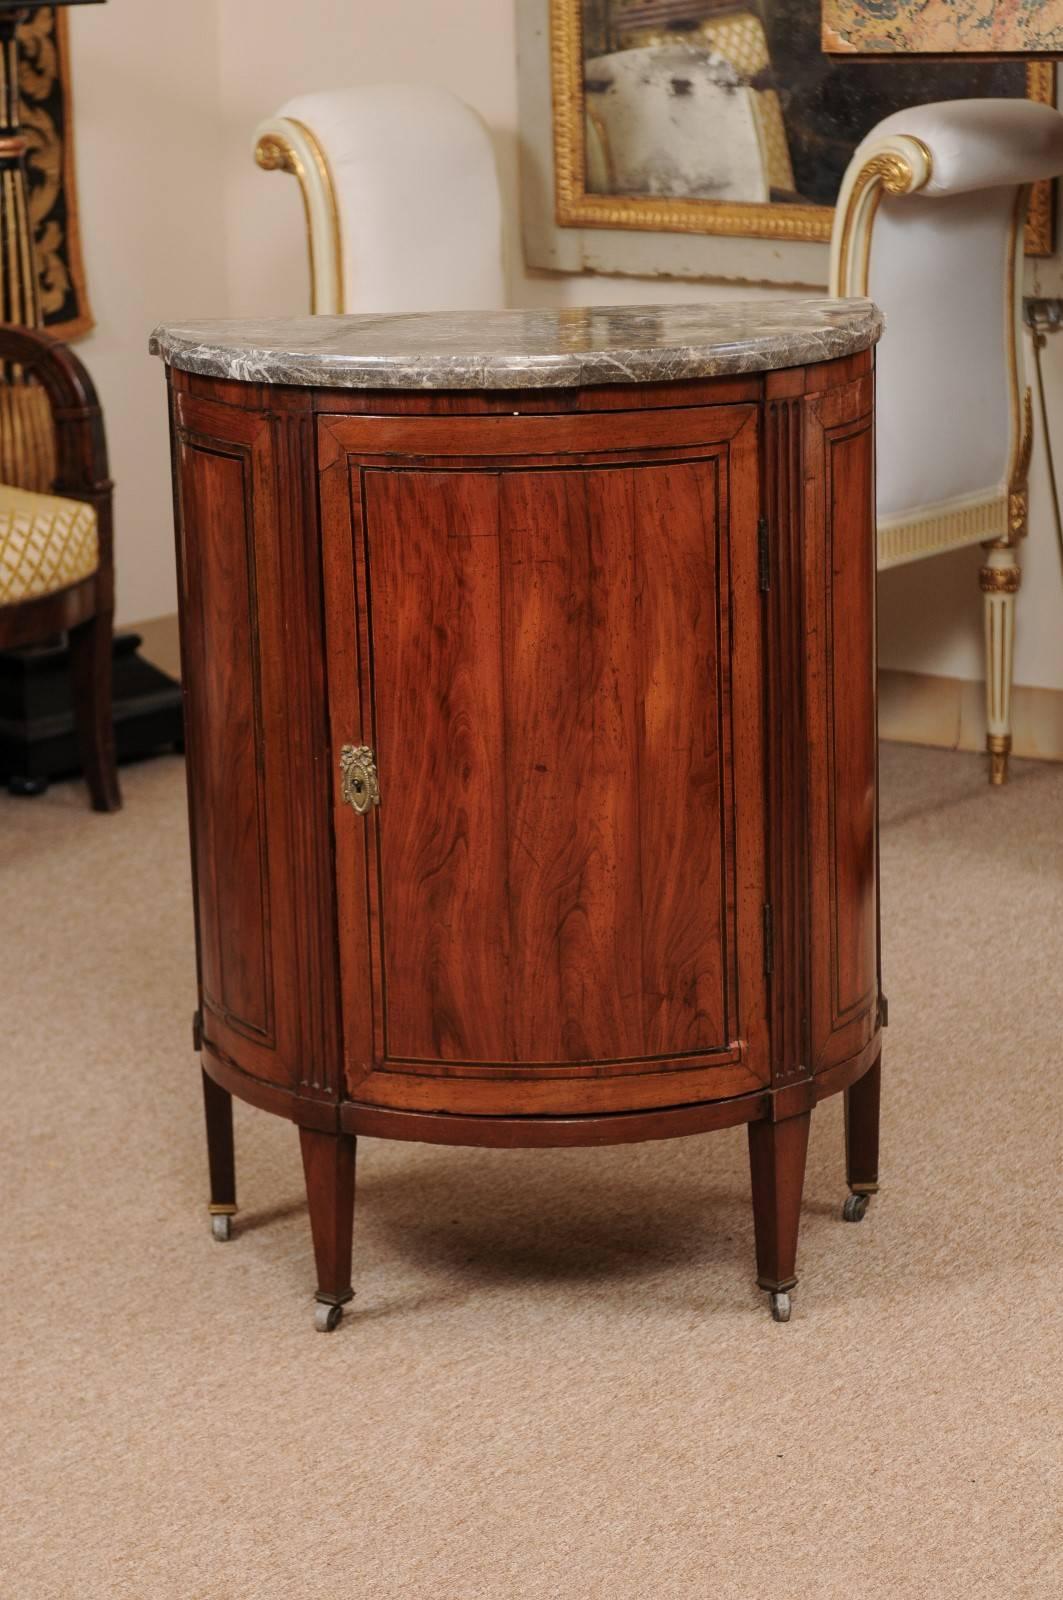 Petite 18th century French Louis XVI period demilune cabinet in walnut with inlay and fluted detail, grey marble top.